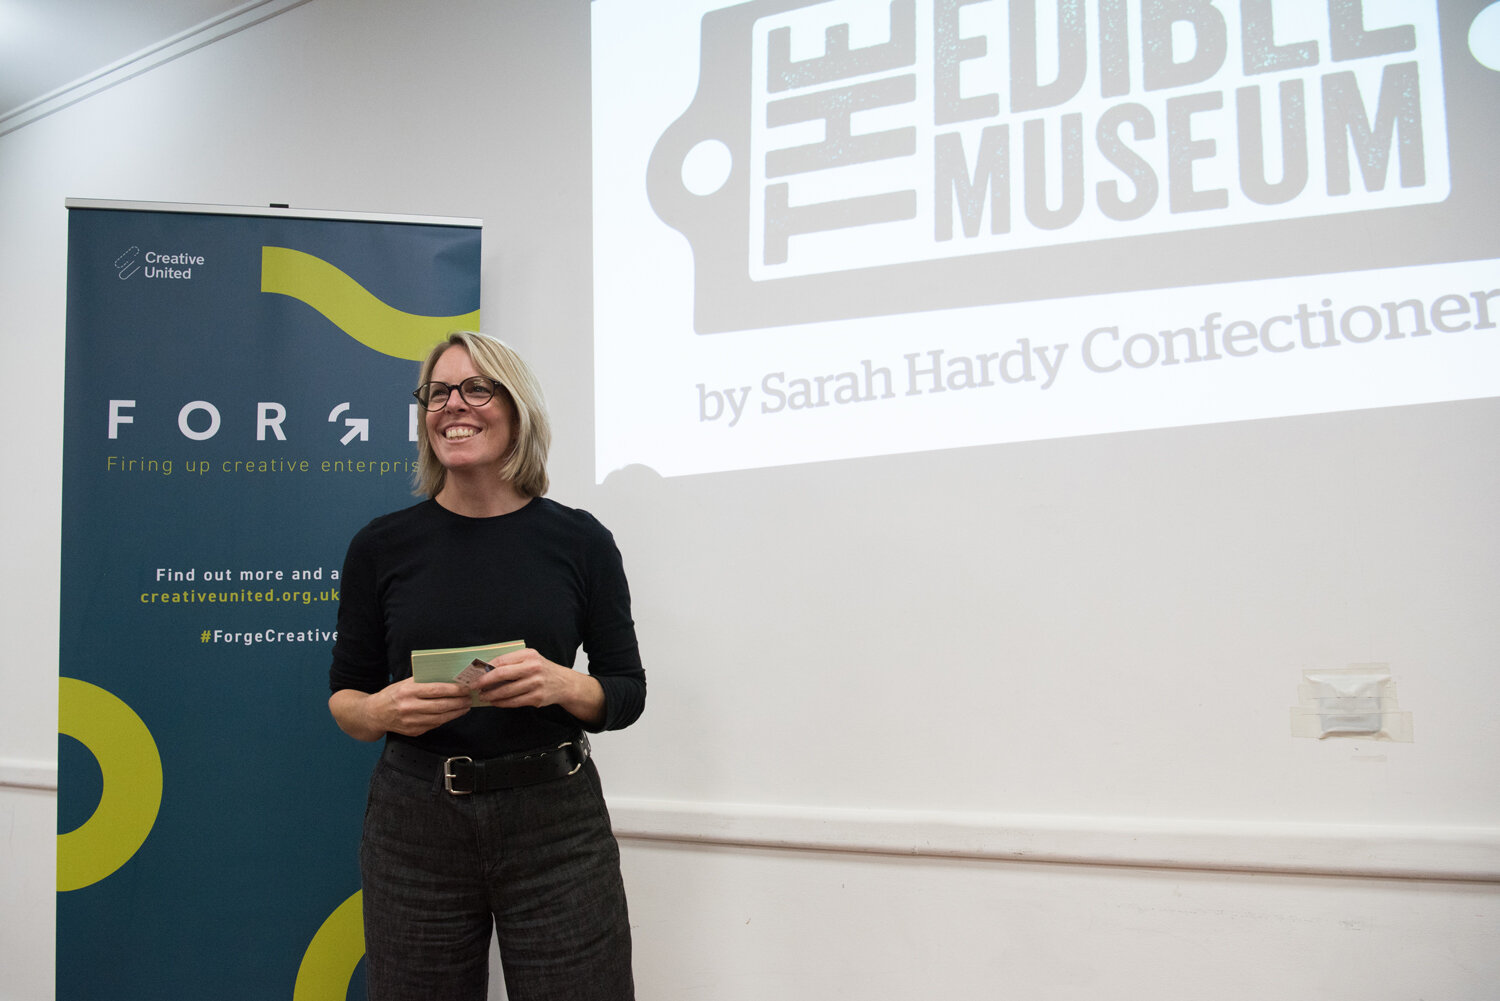 Presentation networking event photographer. Sarah Hardy The Edible Museum